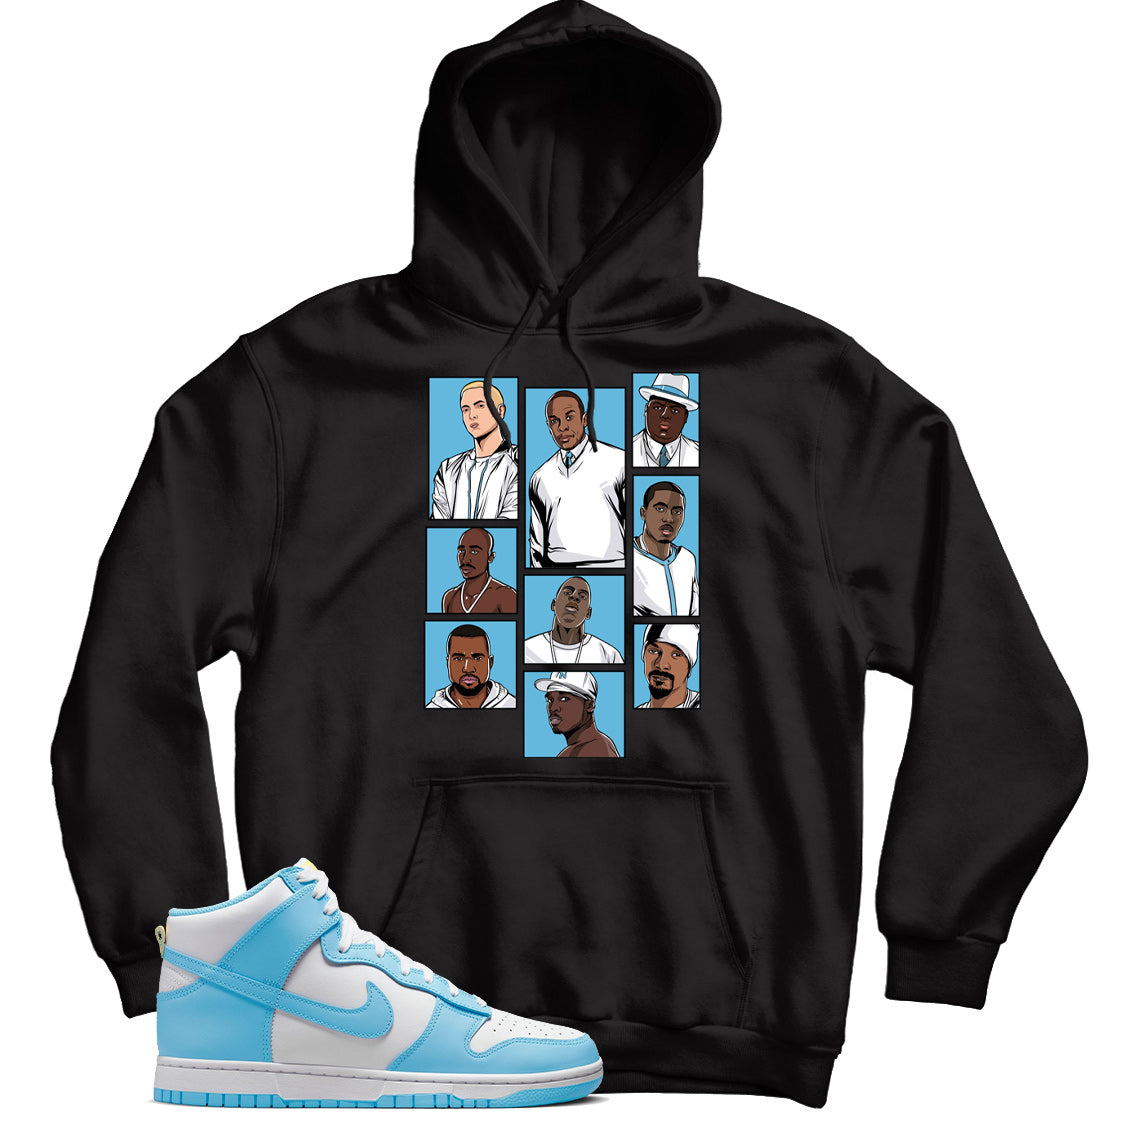 Blue Chill dunks hoodie